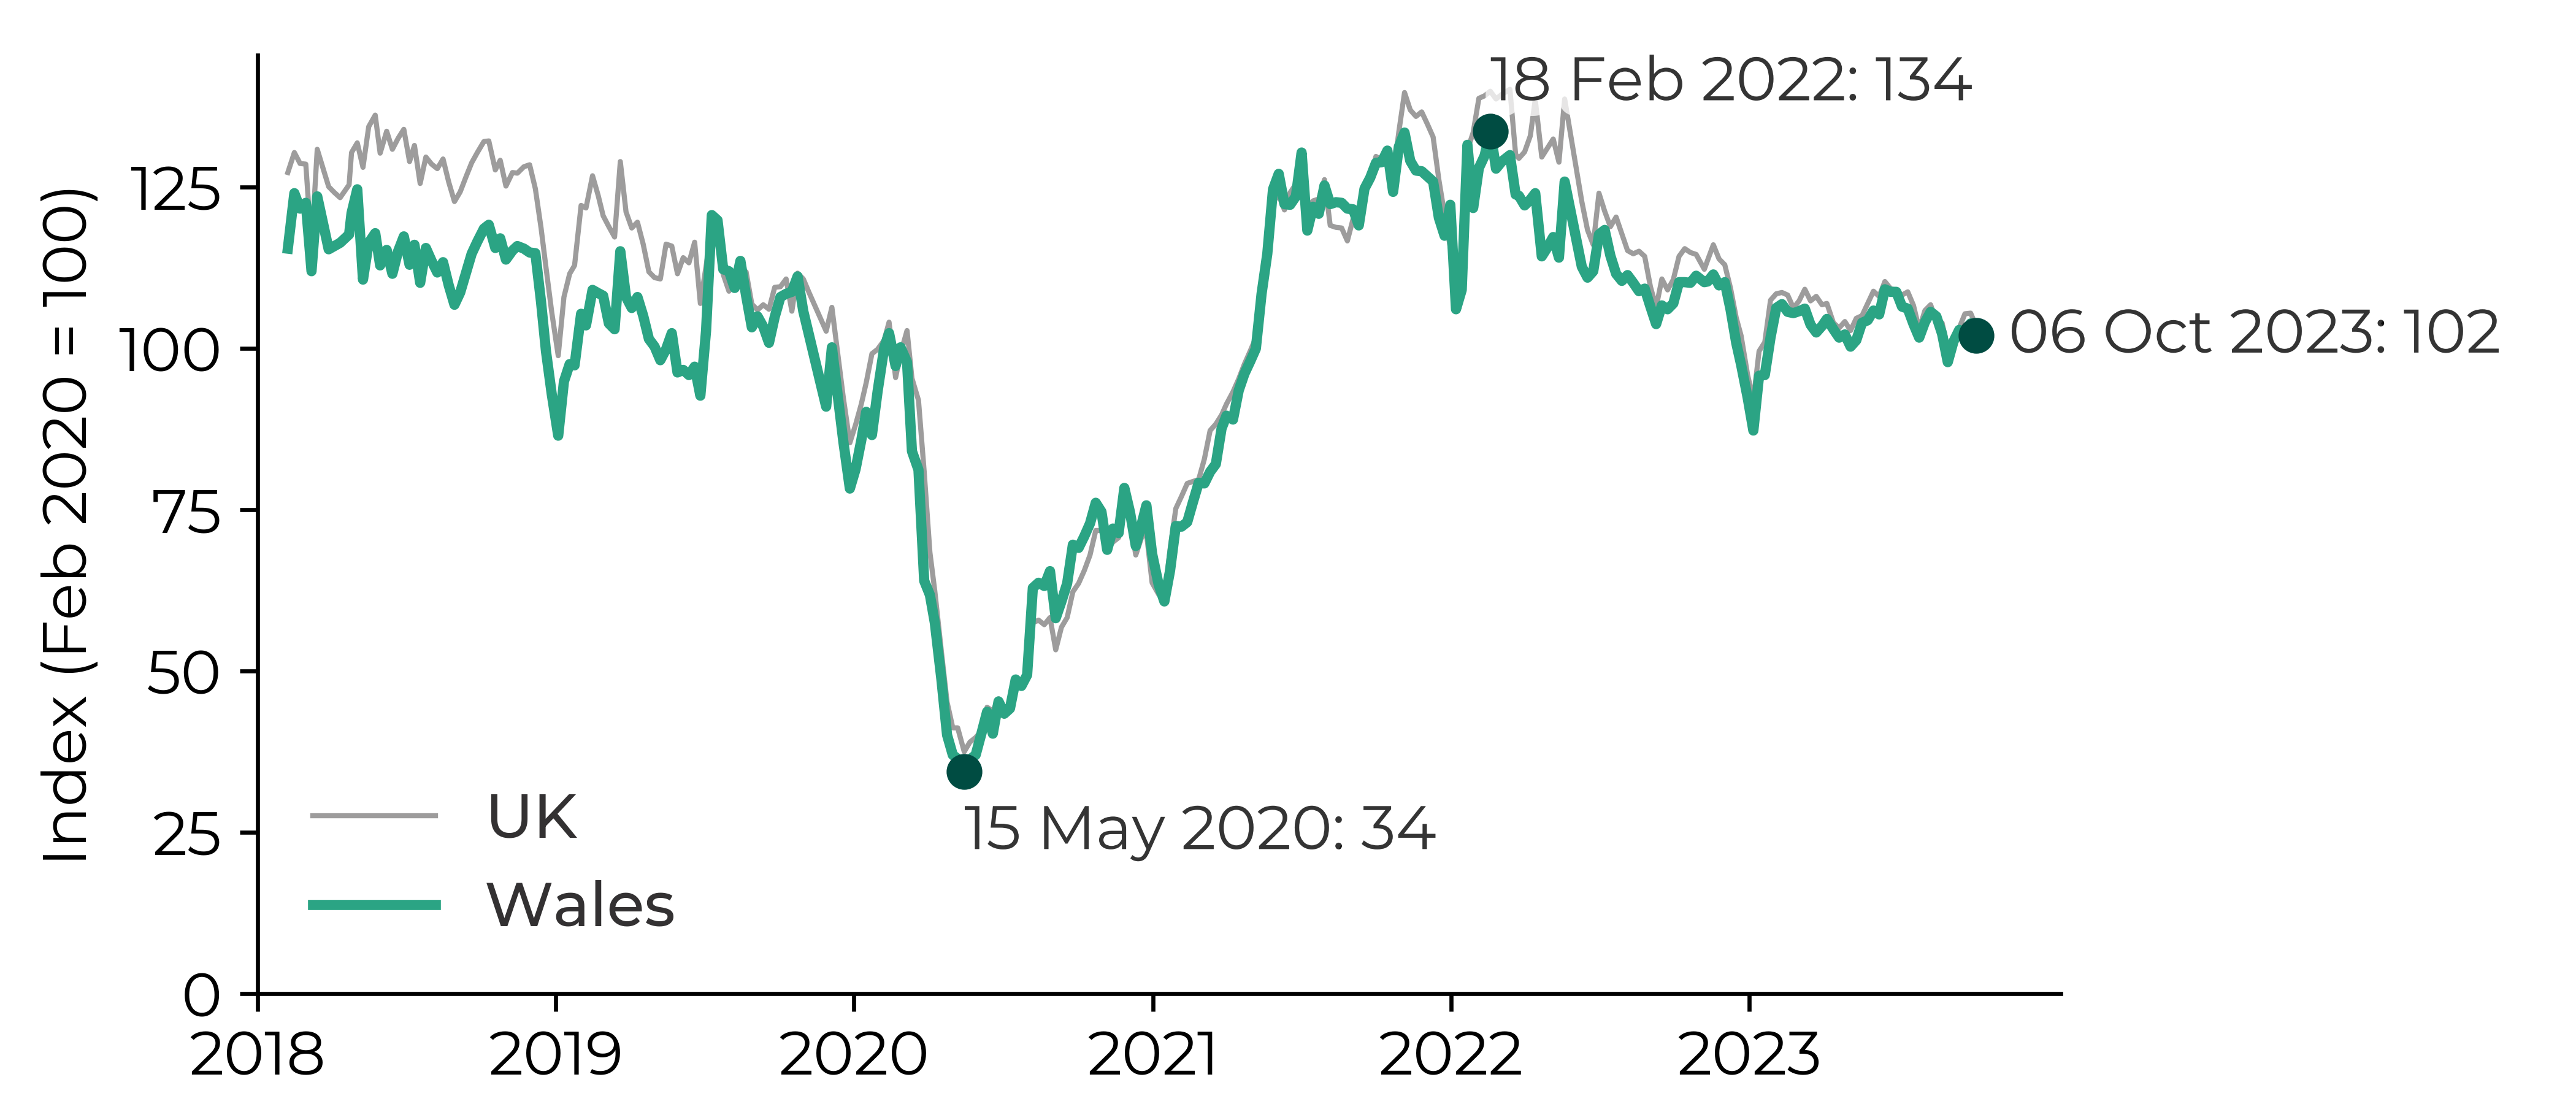 Graph showing that the index decreased from 100 in February 2020 to 34 in May 2020. The index increased to 134 by February 2022 and decreased to 102 by October 2023.